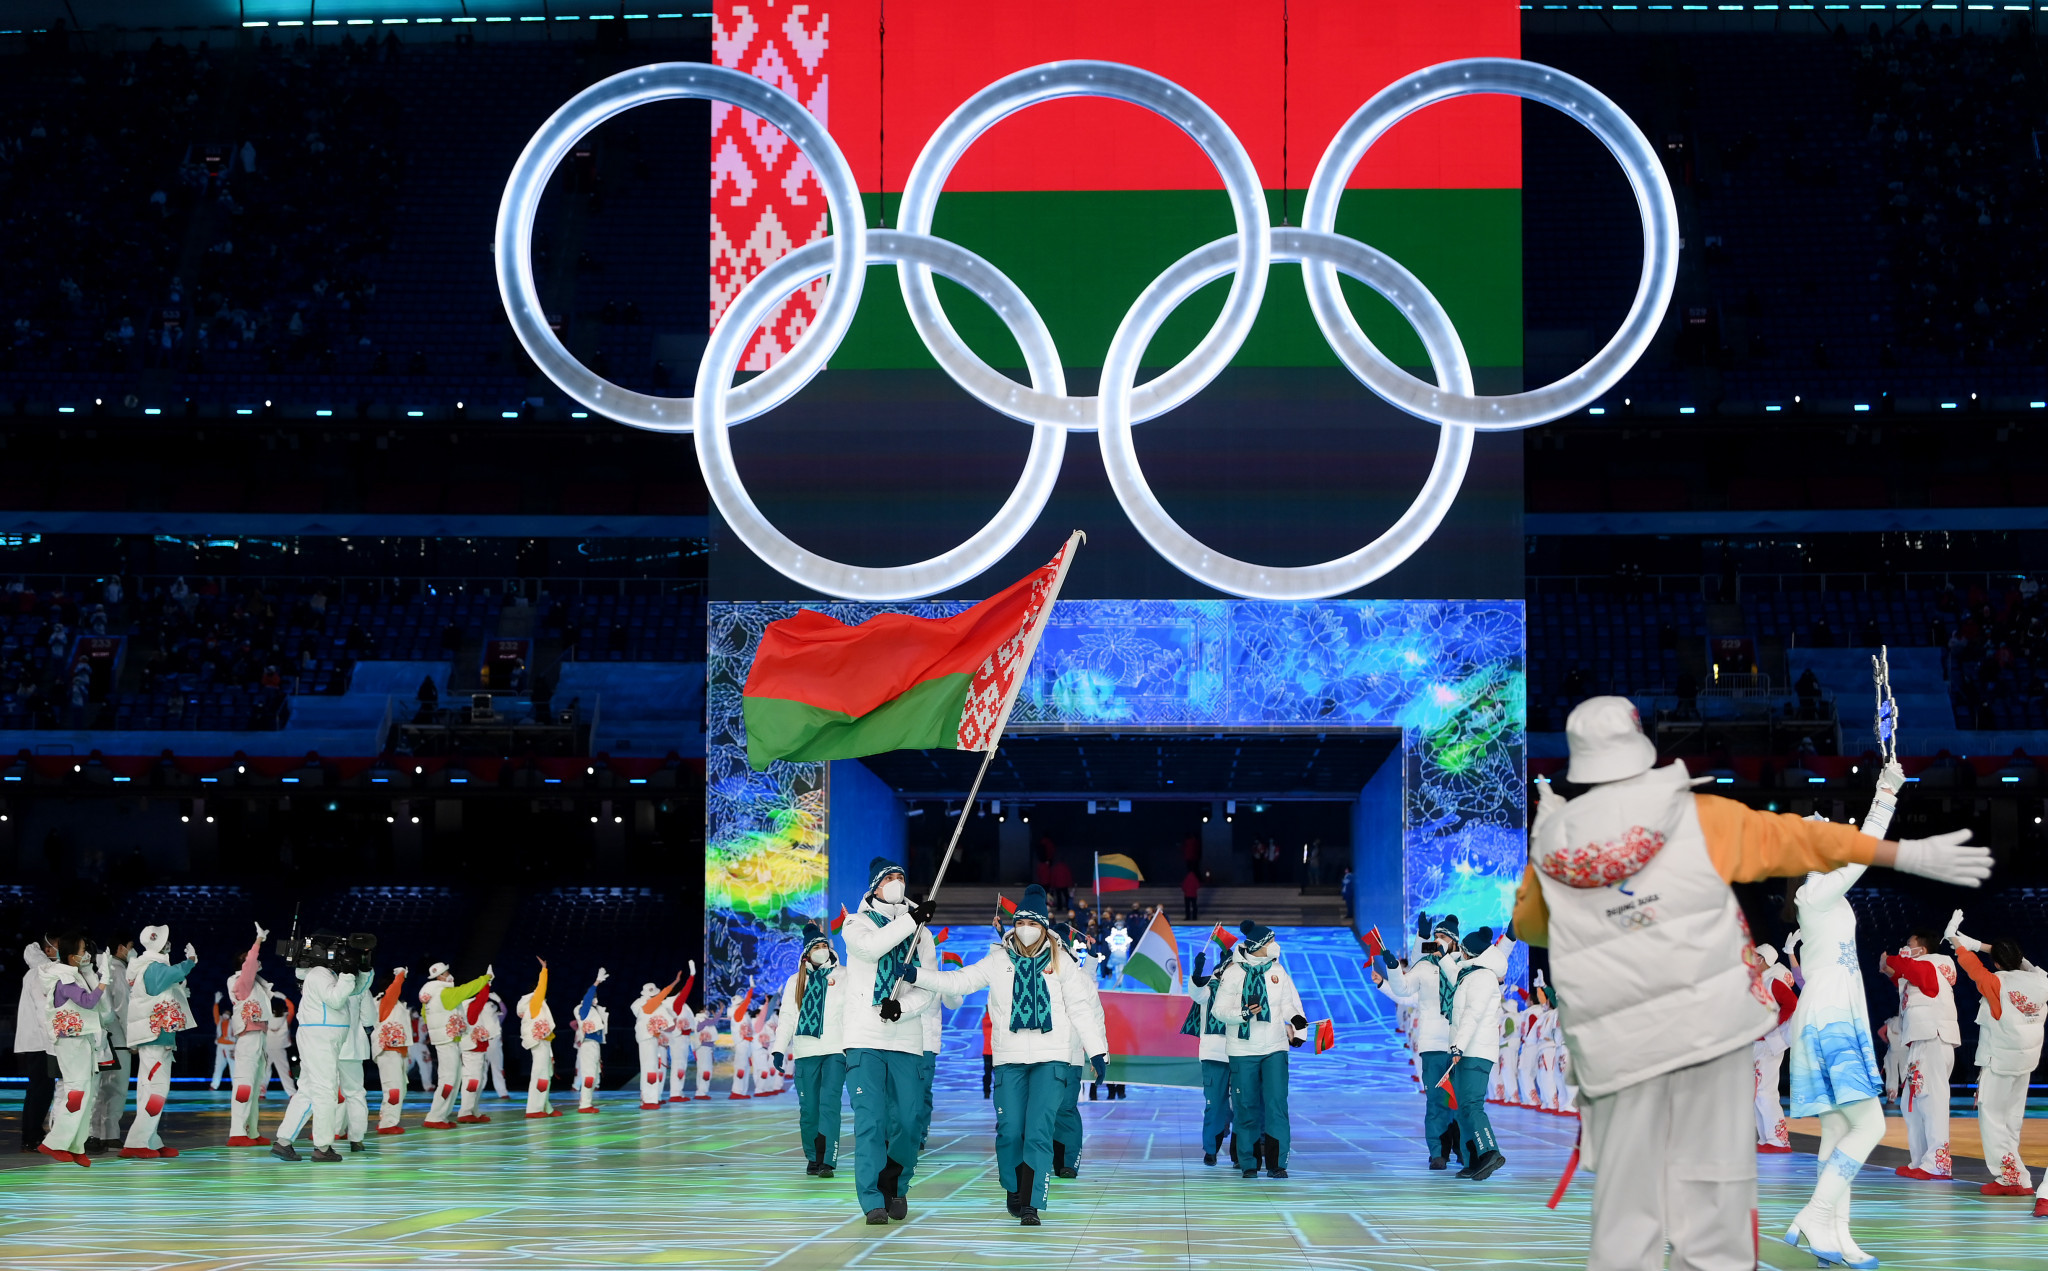 Belarus is still hoping to compete at next year's Olympics in Paris but officials have warned it will not be under any conditions ©Getty Images